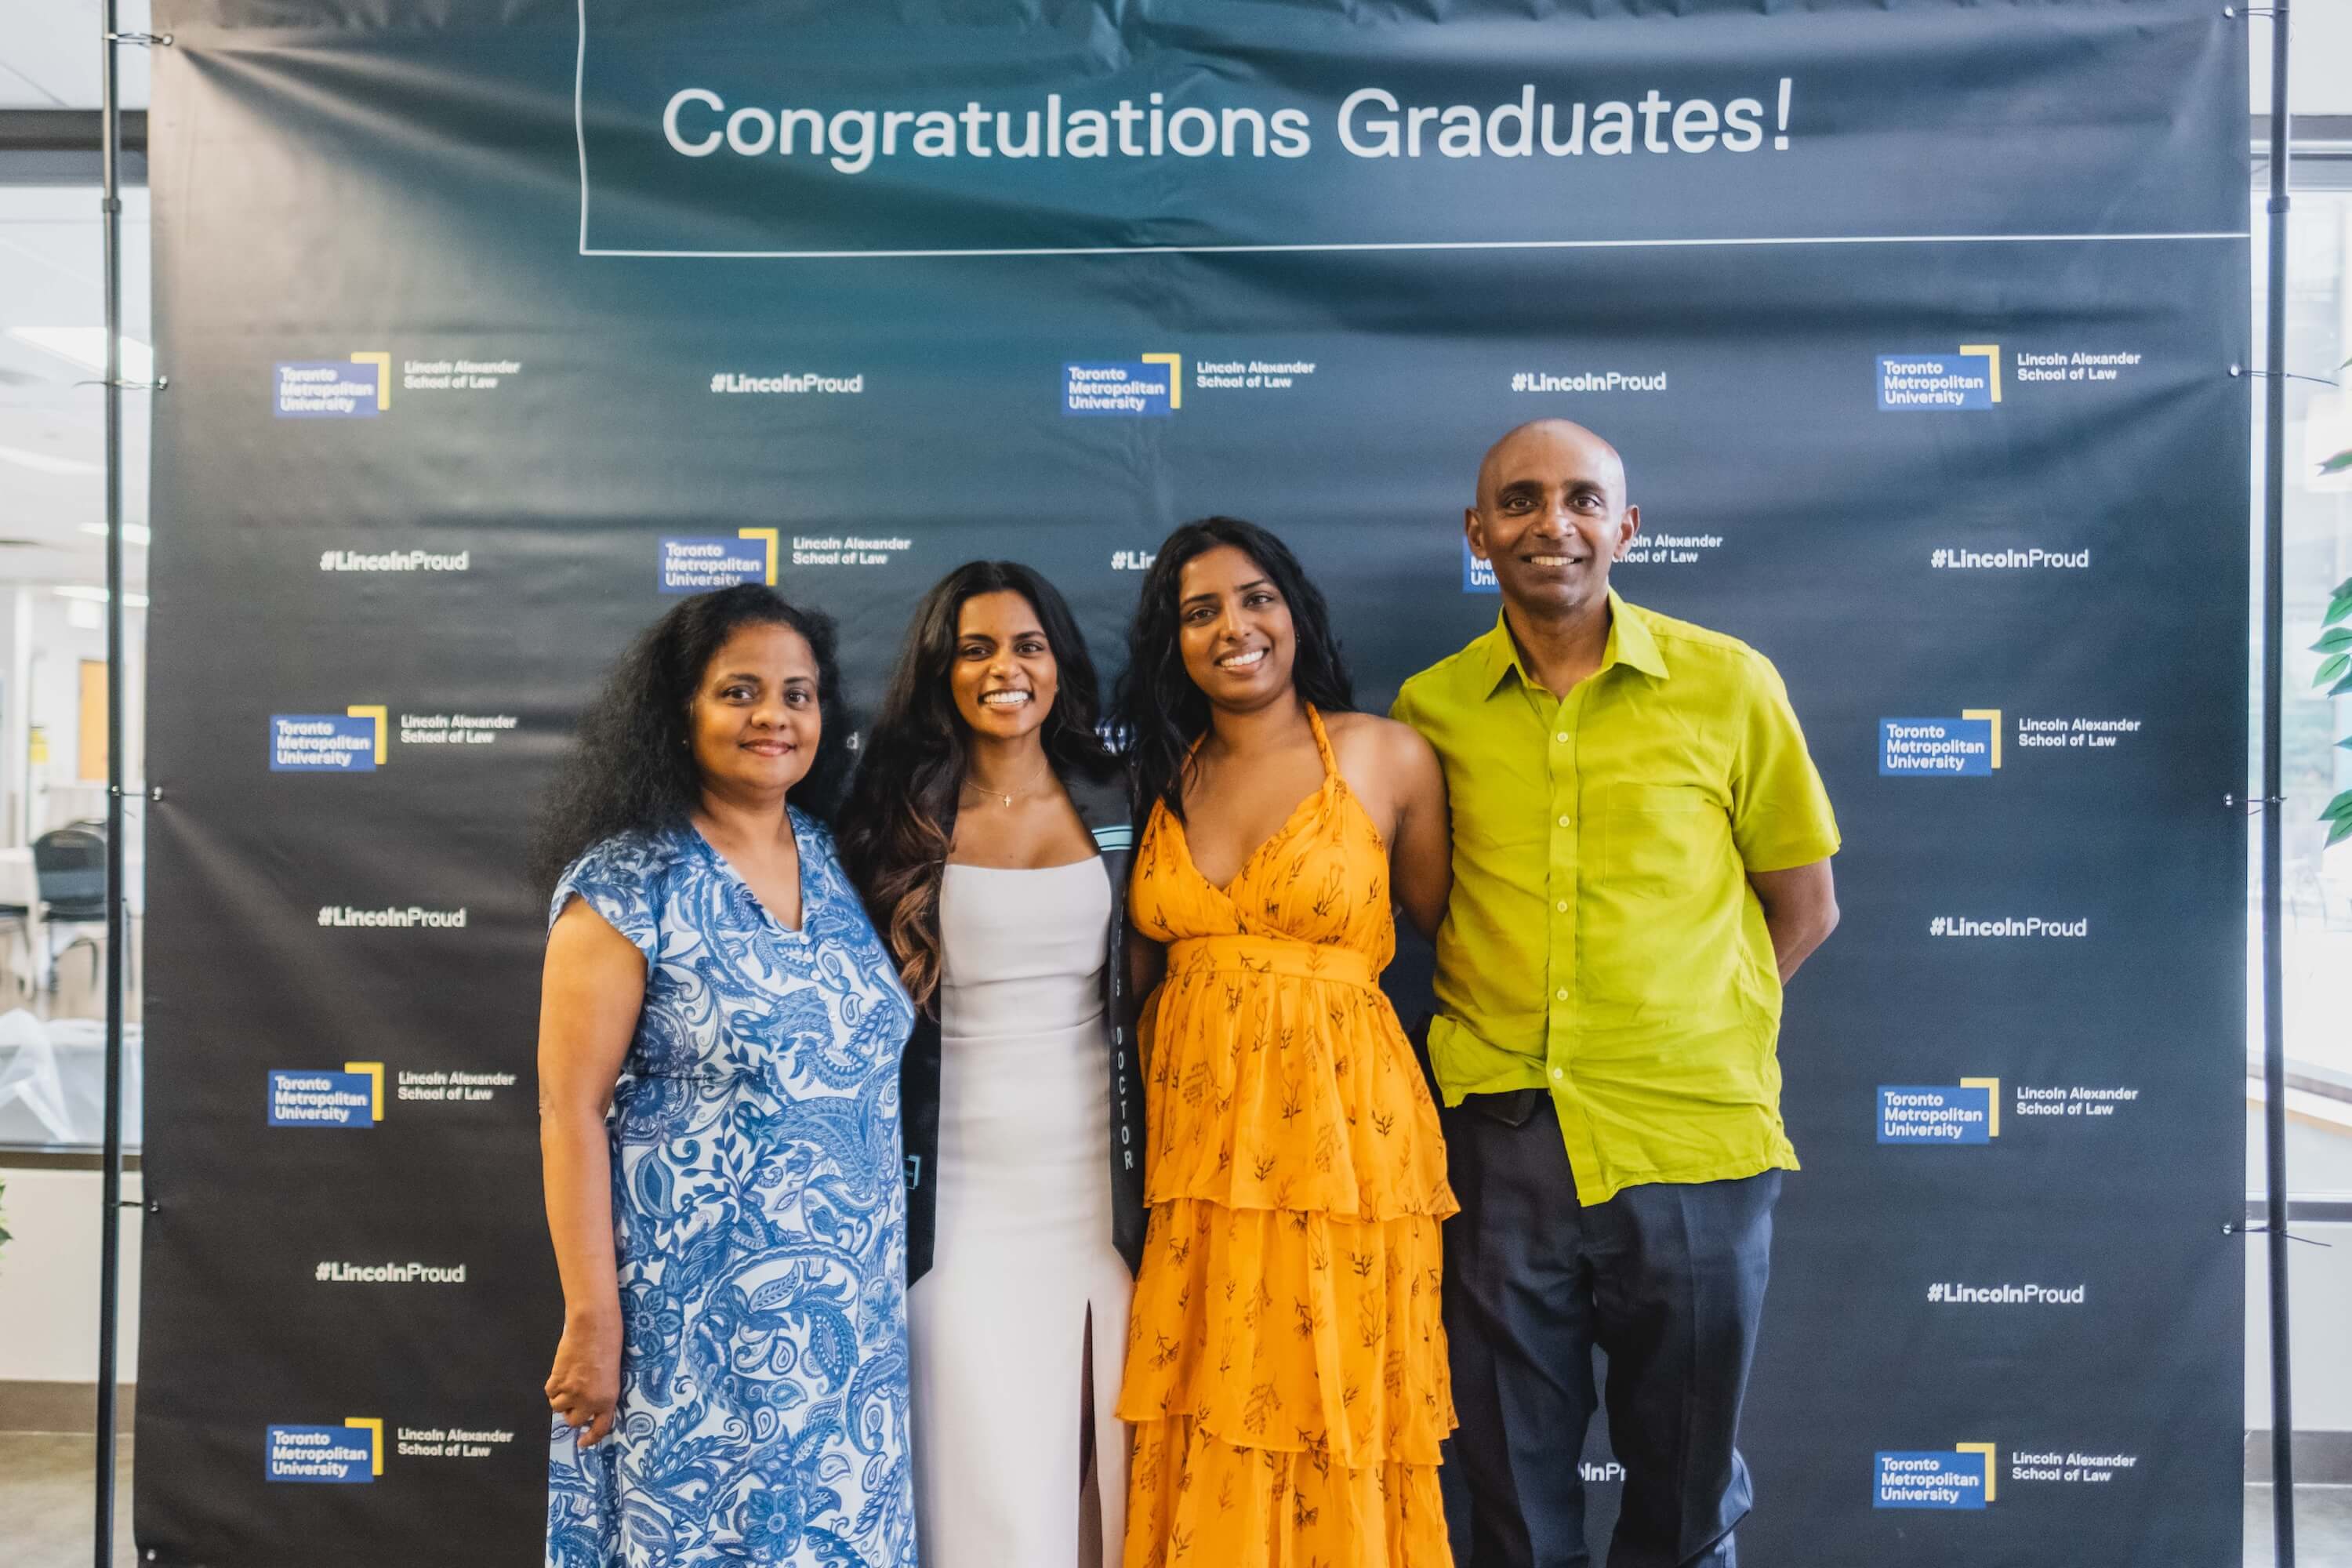 two young women, a man and a woman pose in front of a backdrop that says "Congratulations Graduates!"